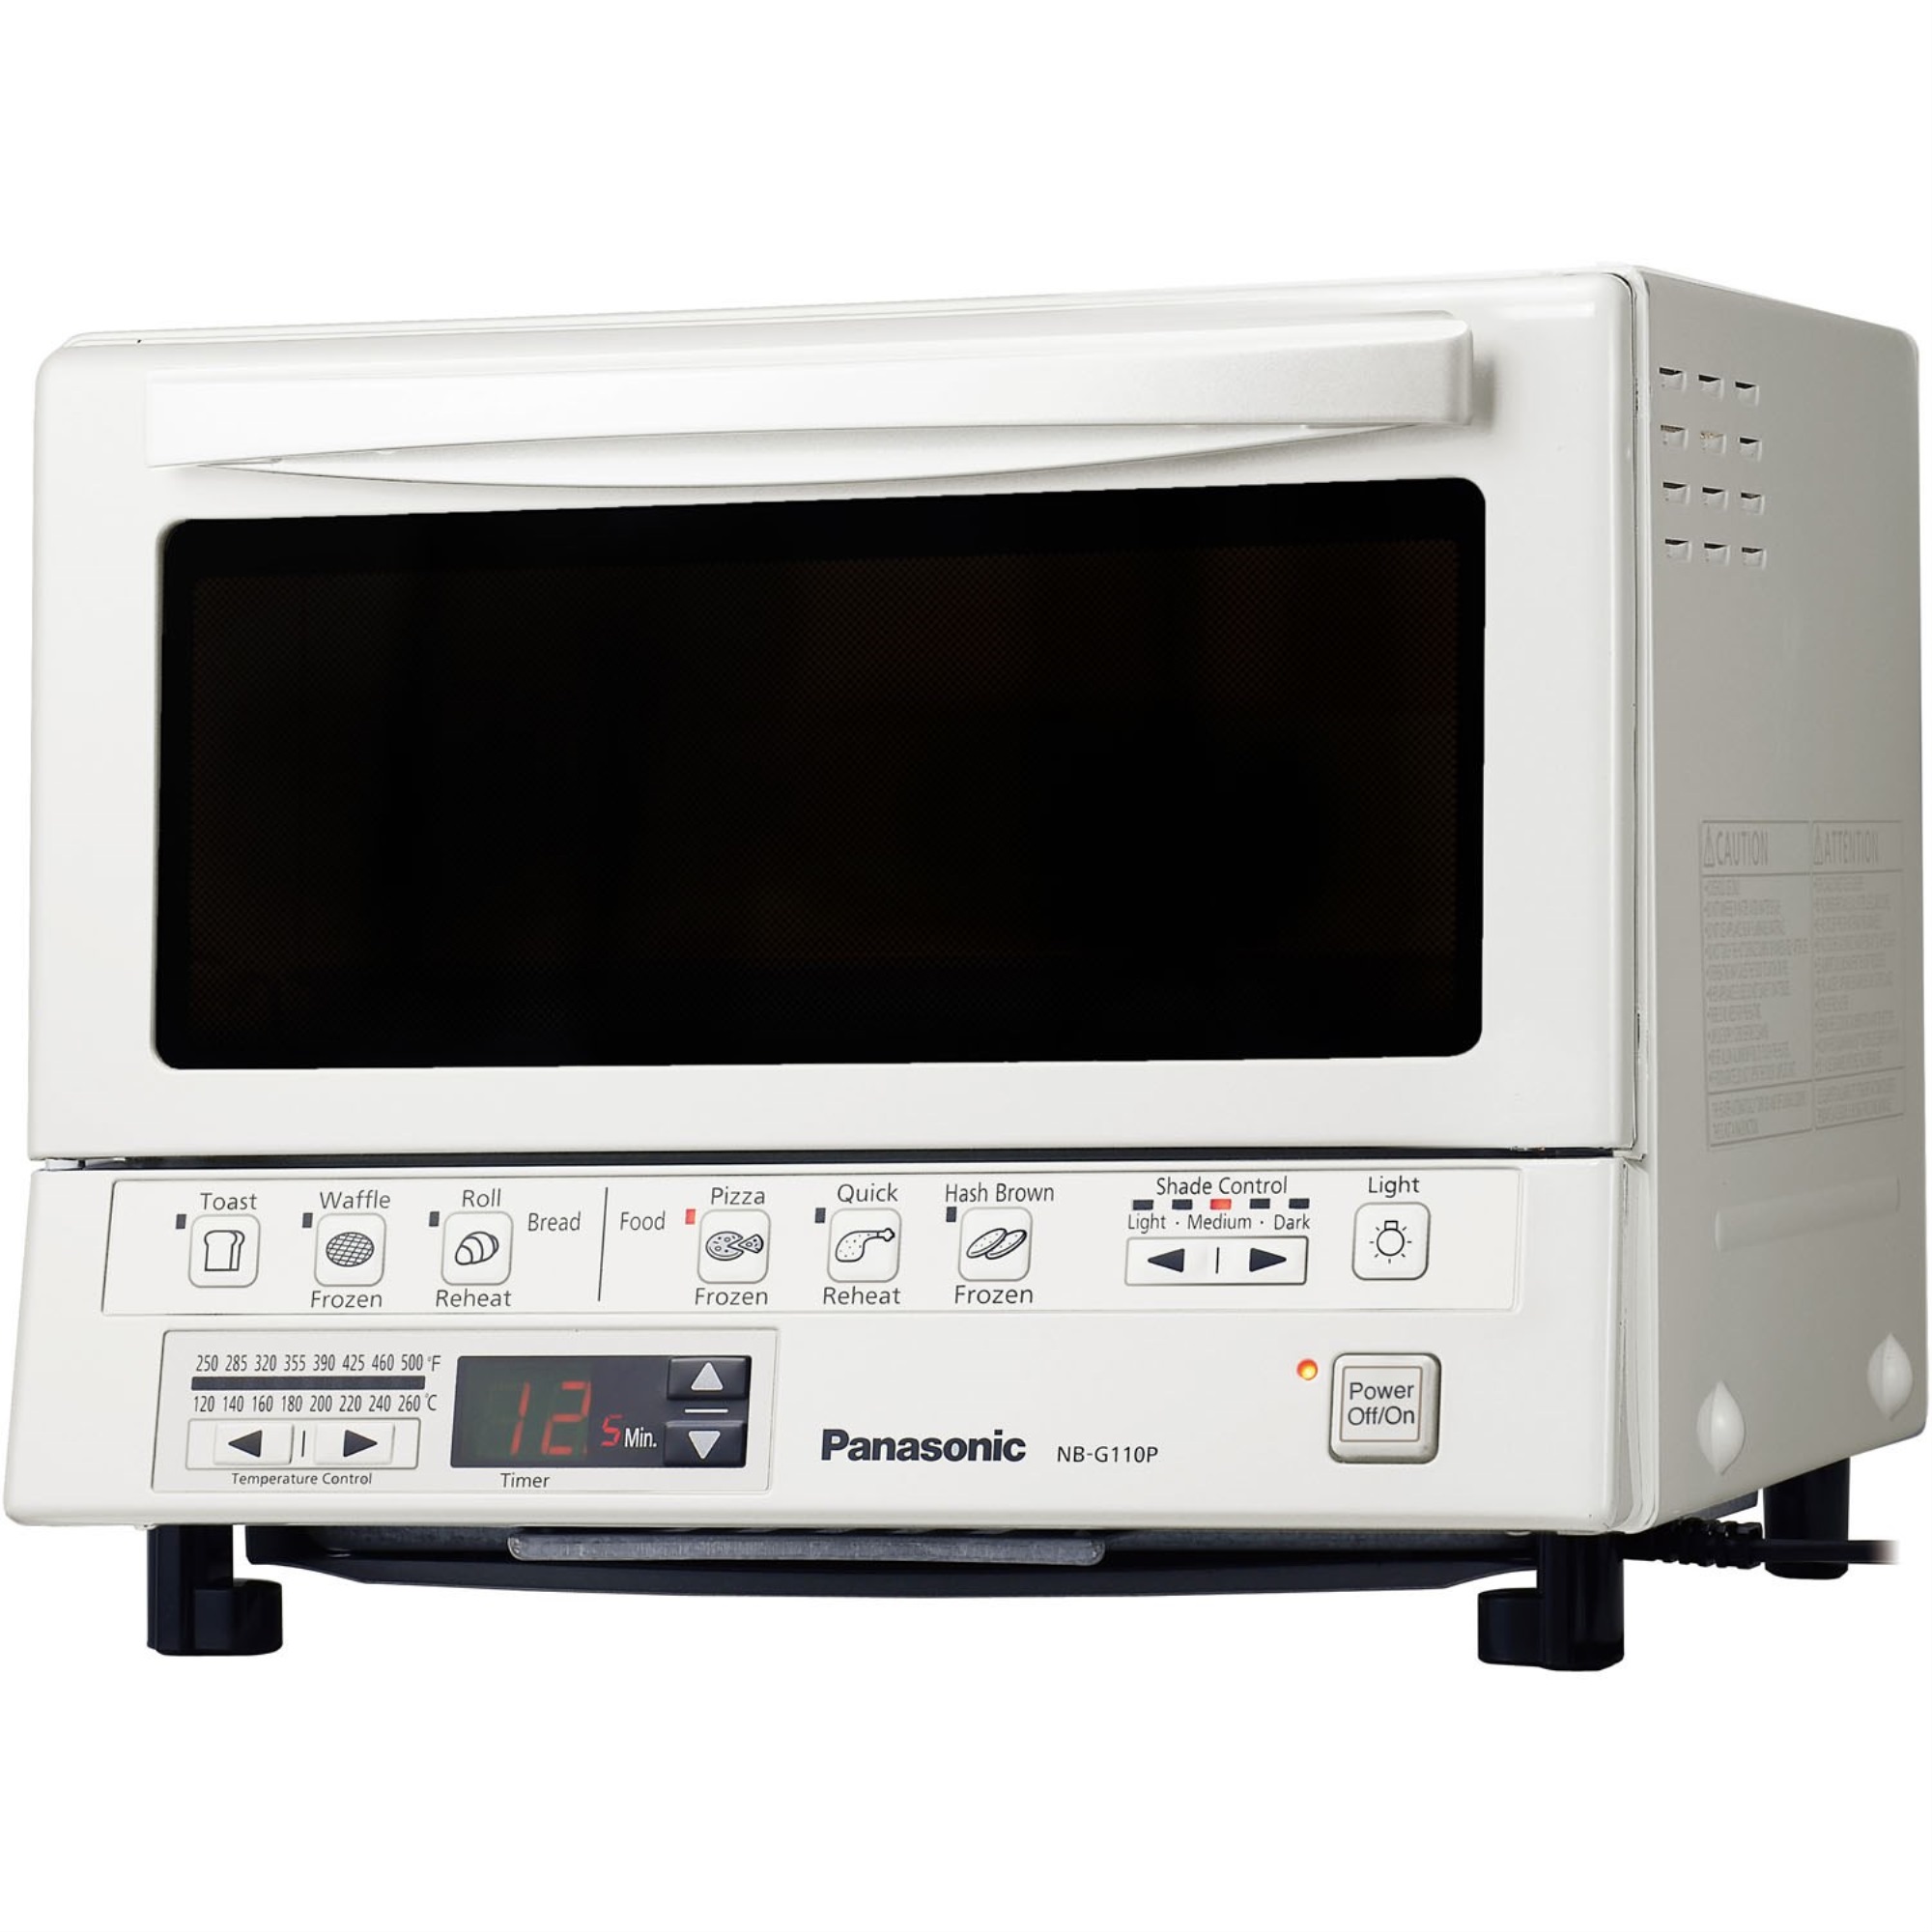 Toaster Oven - White - image 1 of 5